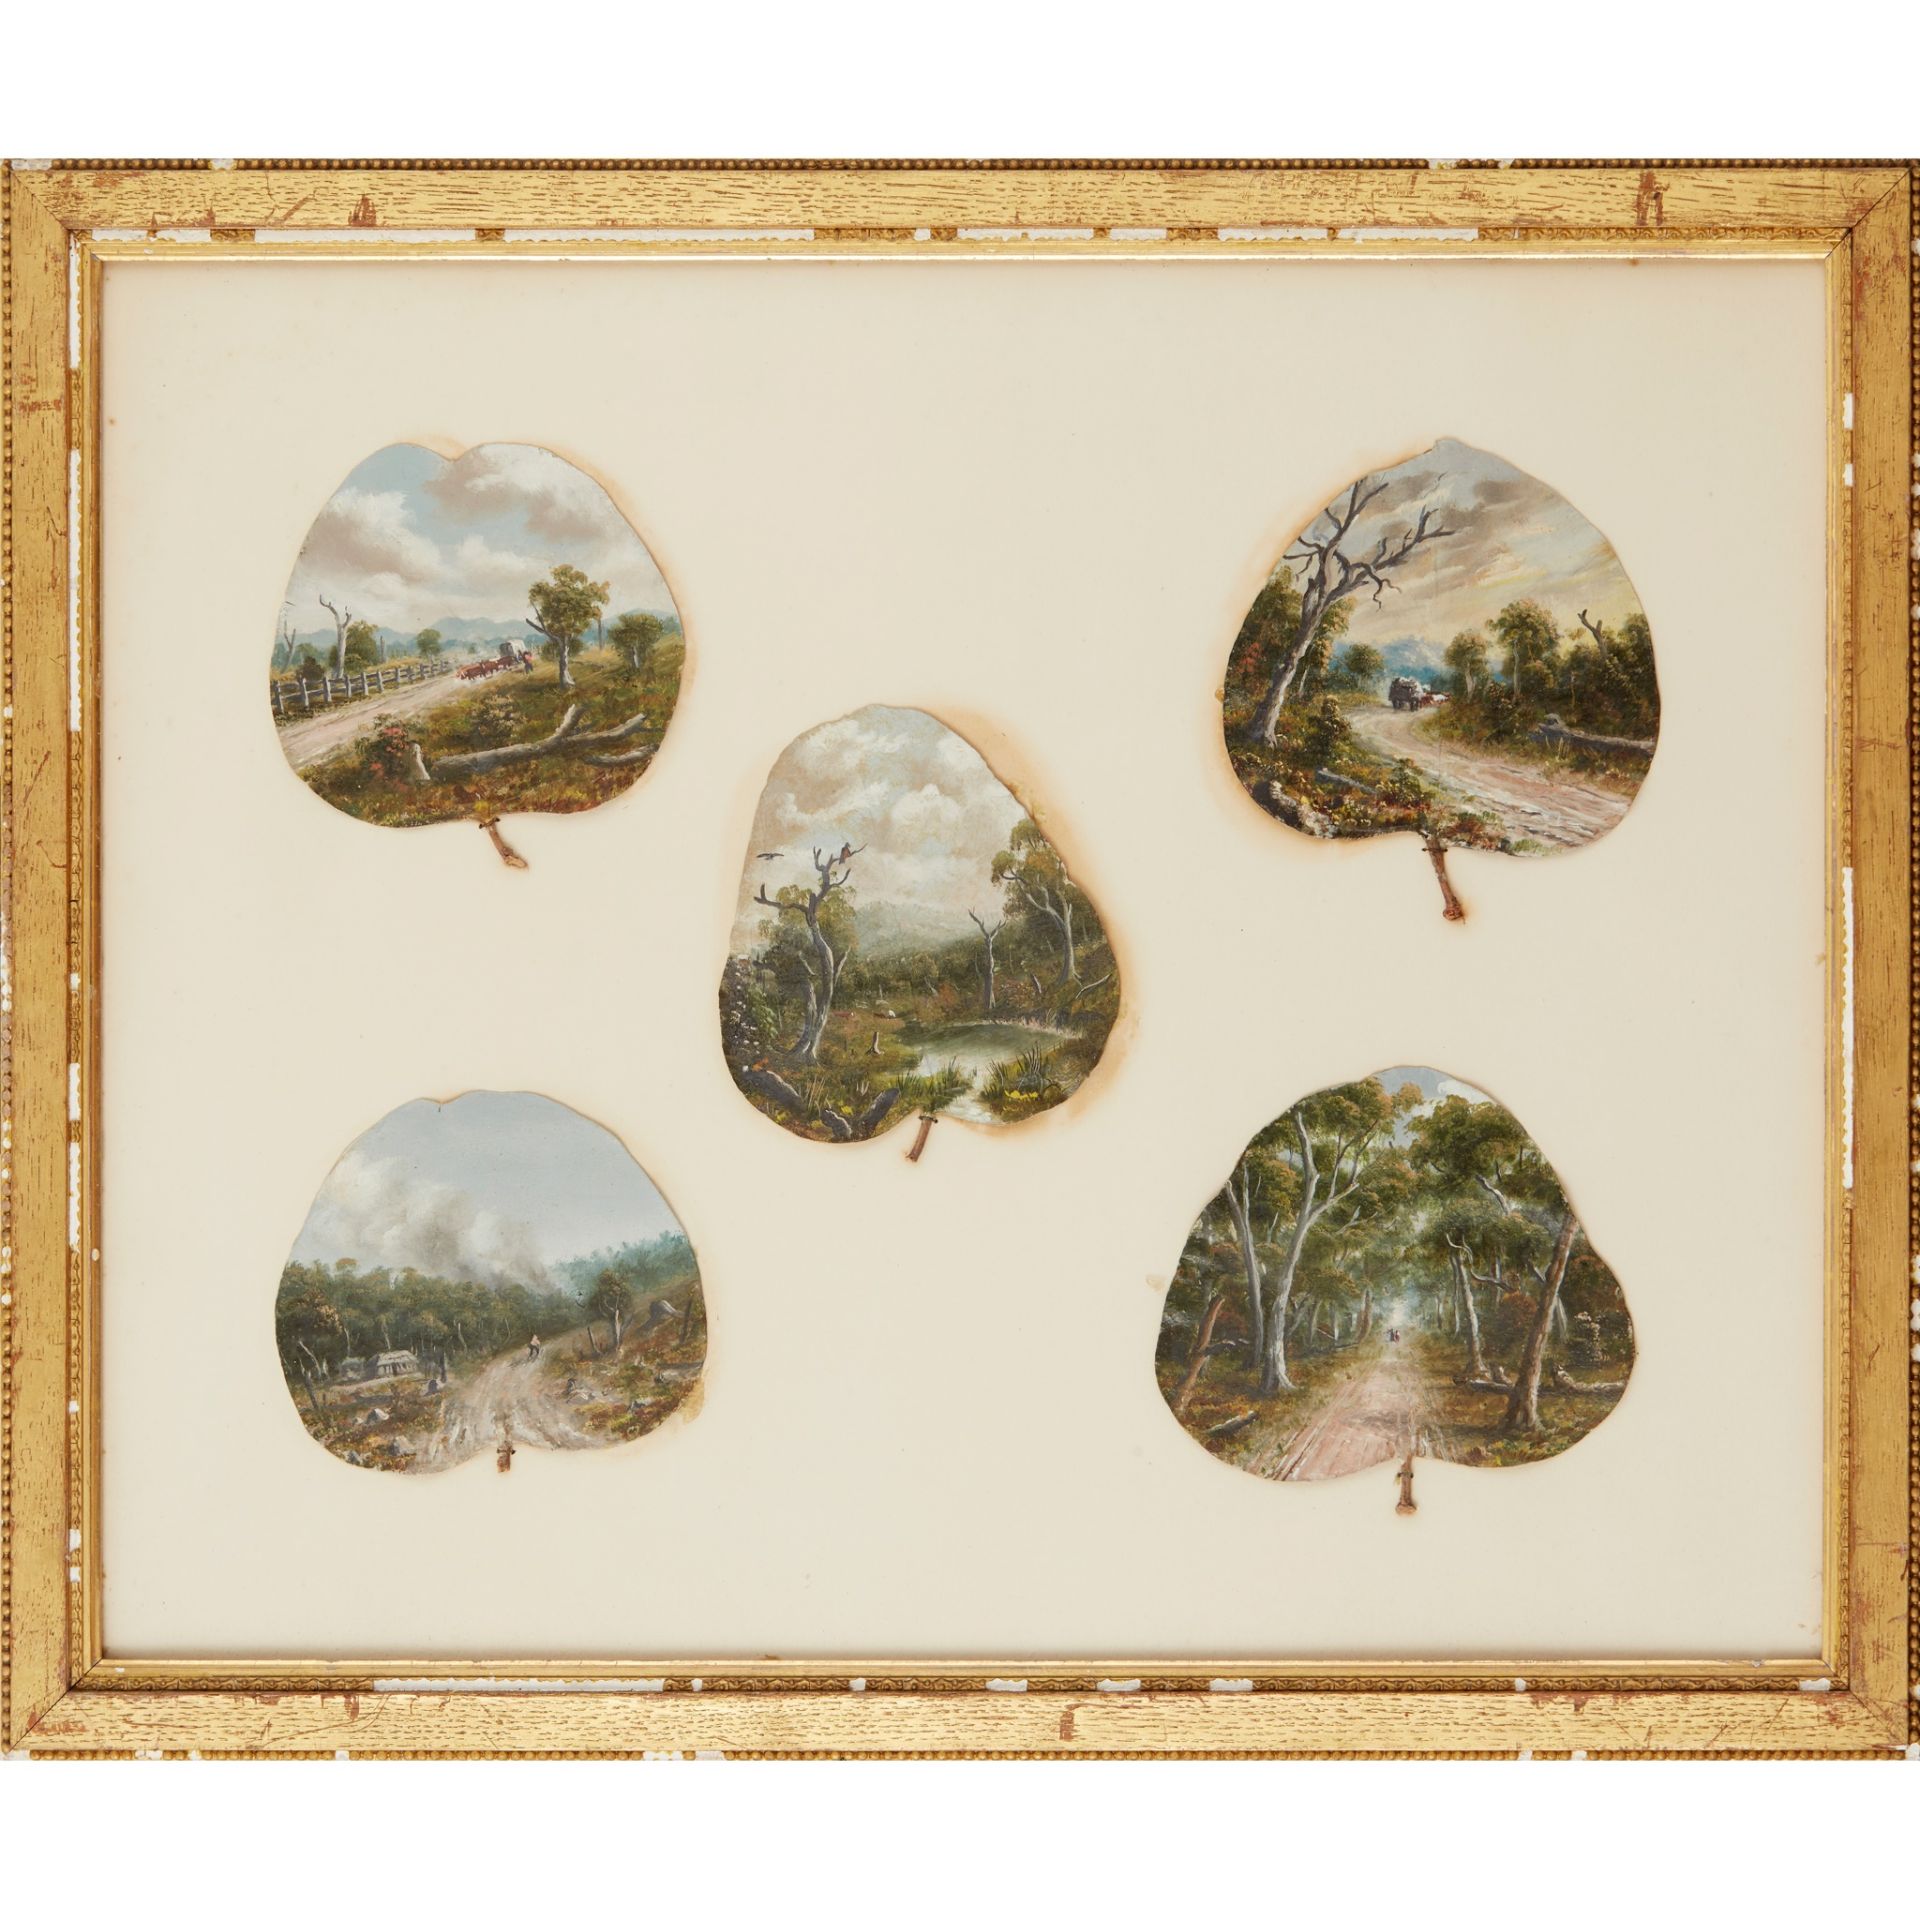 ATTRIBUTED TO ALFRED WILLIAM EUSTACE (1820-1907) FRAMED COLLECTION OF EUCALYPTUS LEAF PAINTINGS - Image 2 of 2